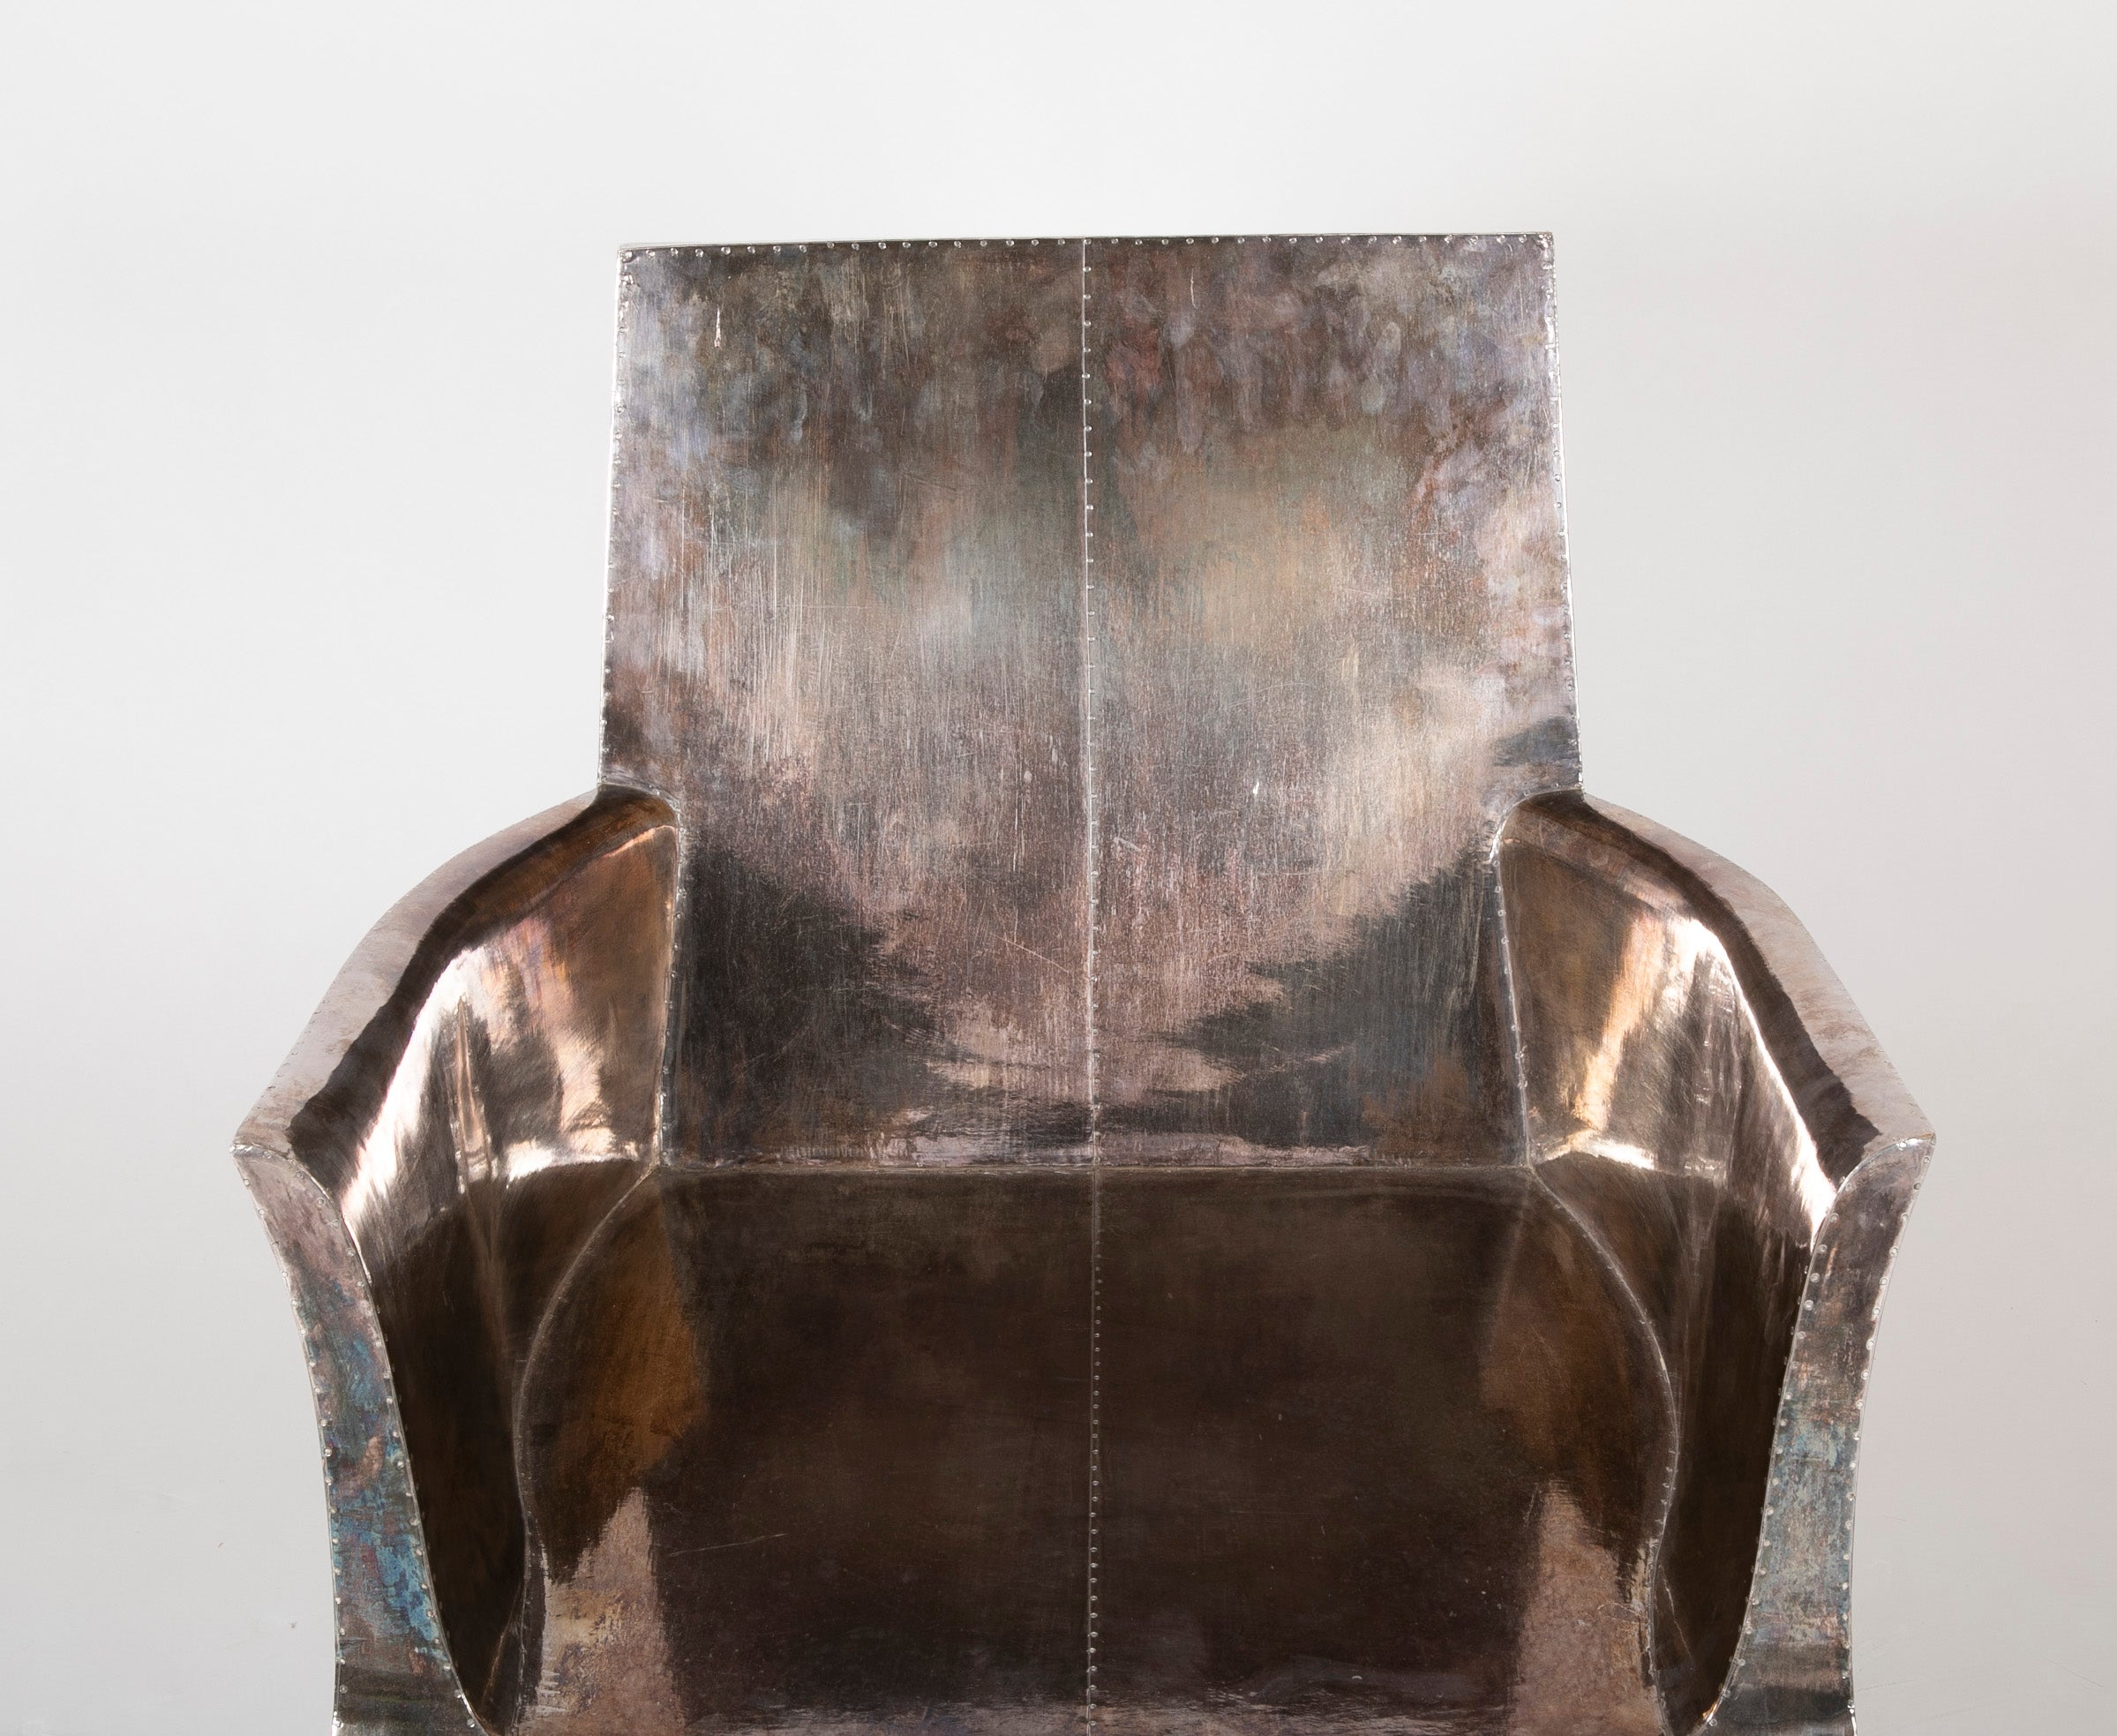 Pair of Silvered "Louise" Chairs by Paul Mathieu